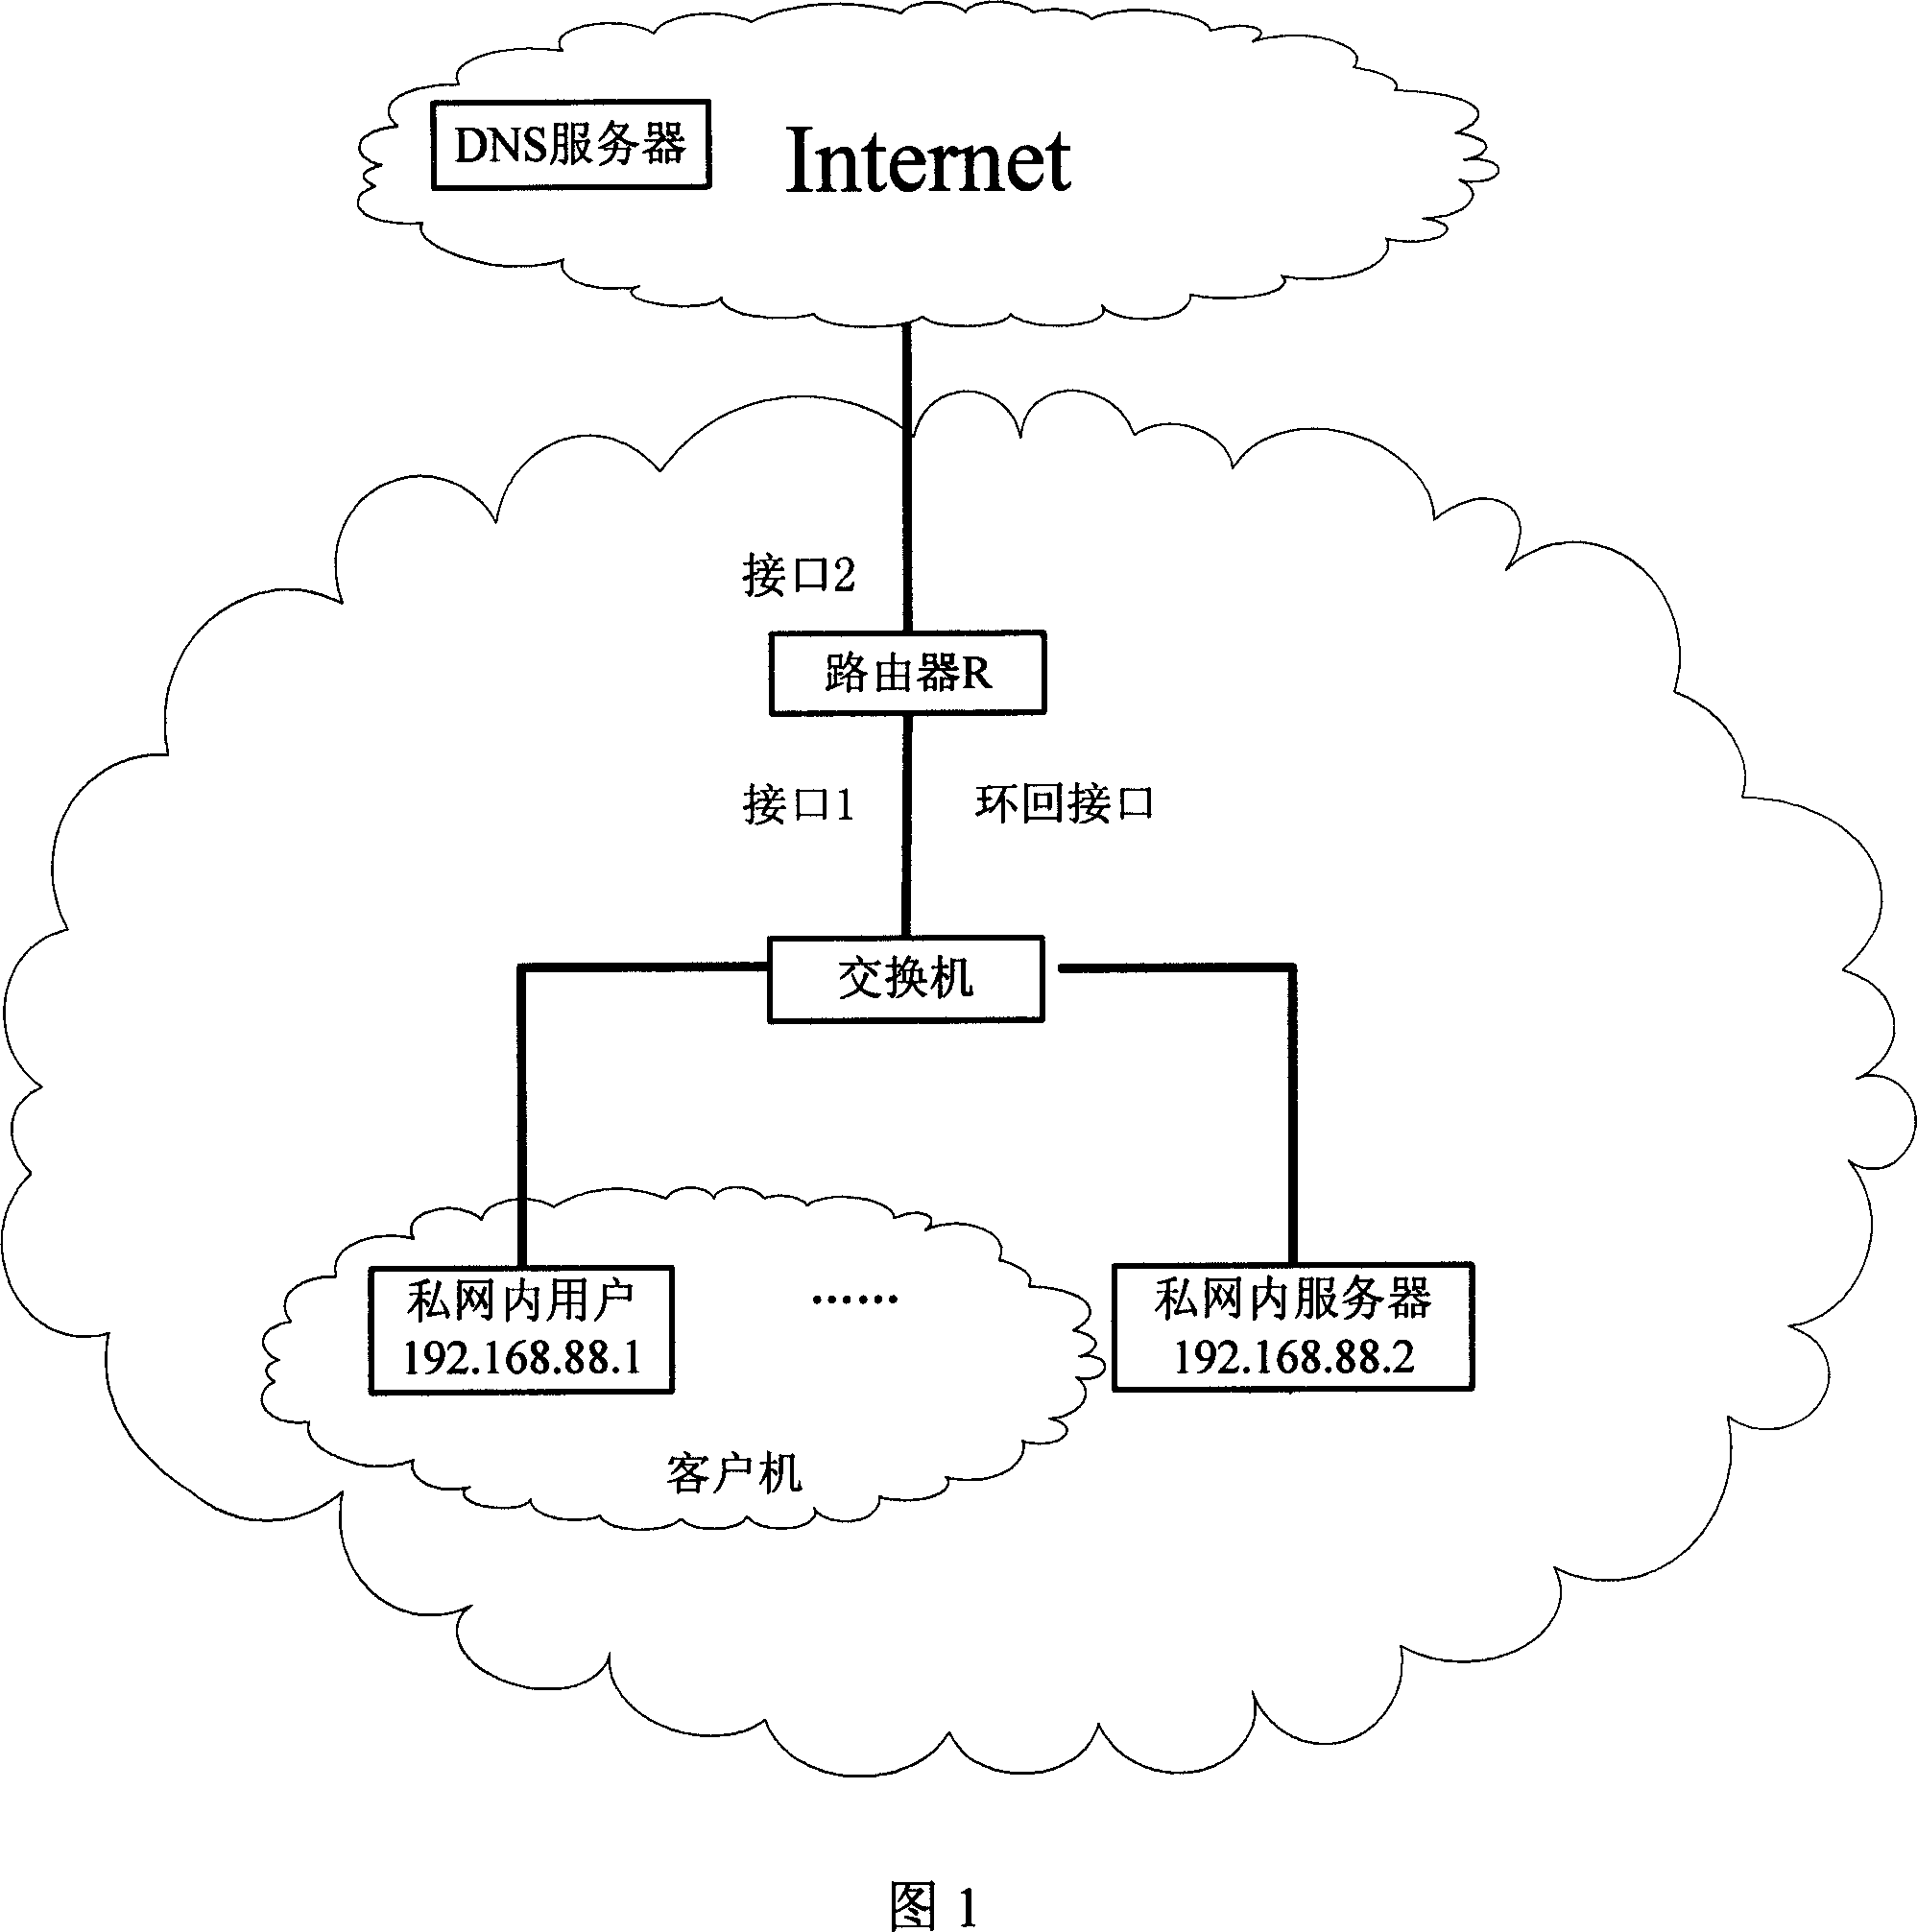 A method of private network user access the server in a private network through domain name